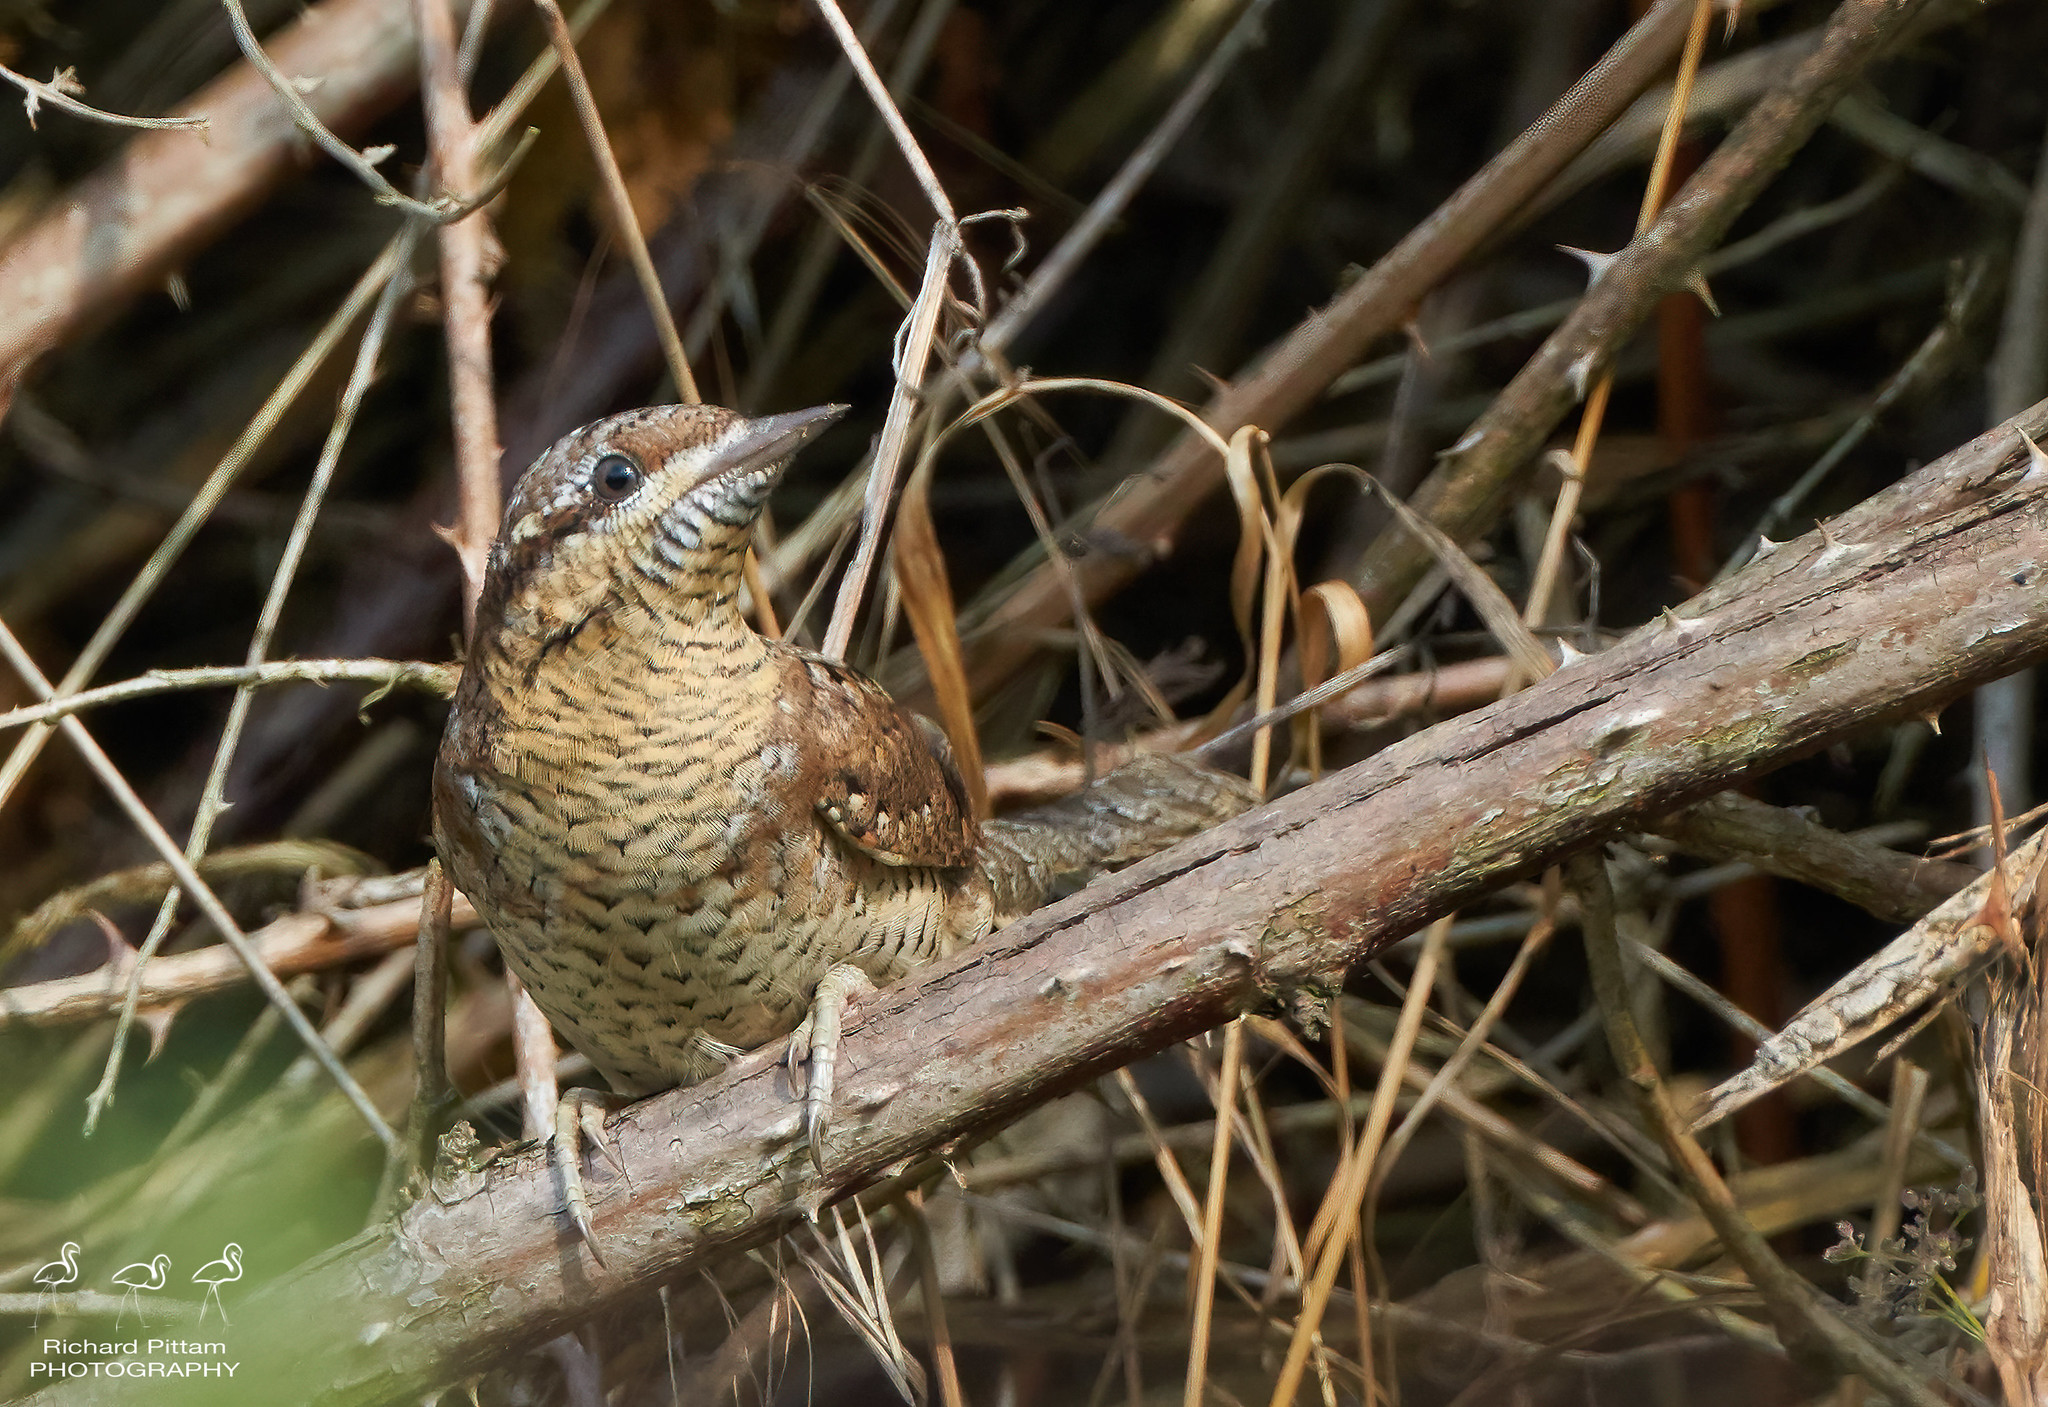 Wrneck - too hot and too much vegetation for any decent images sadly